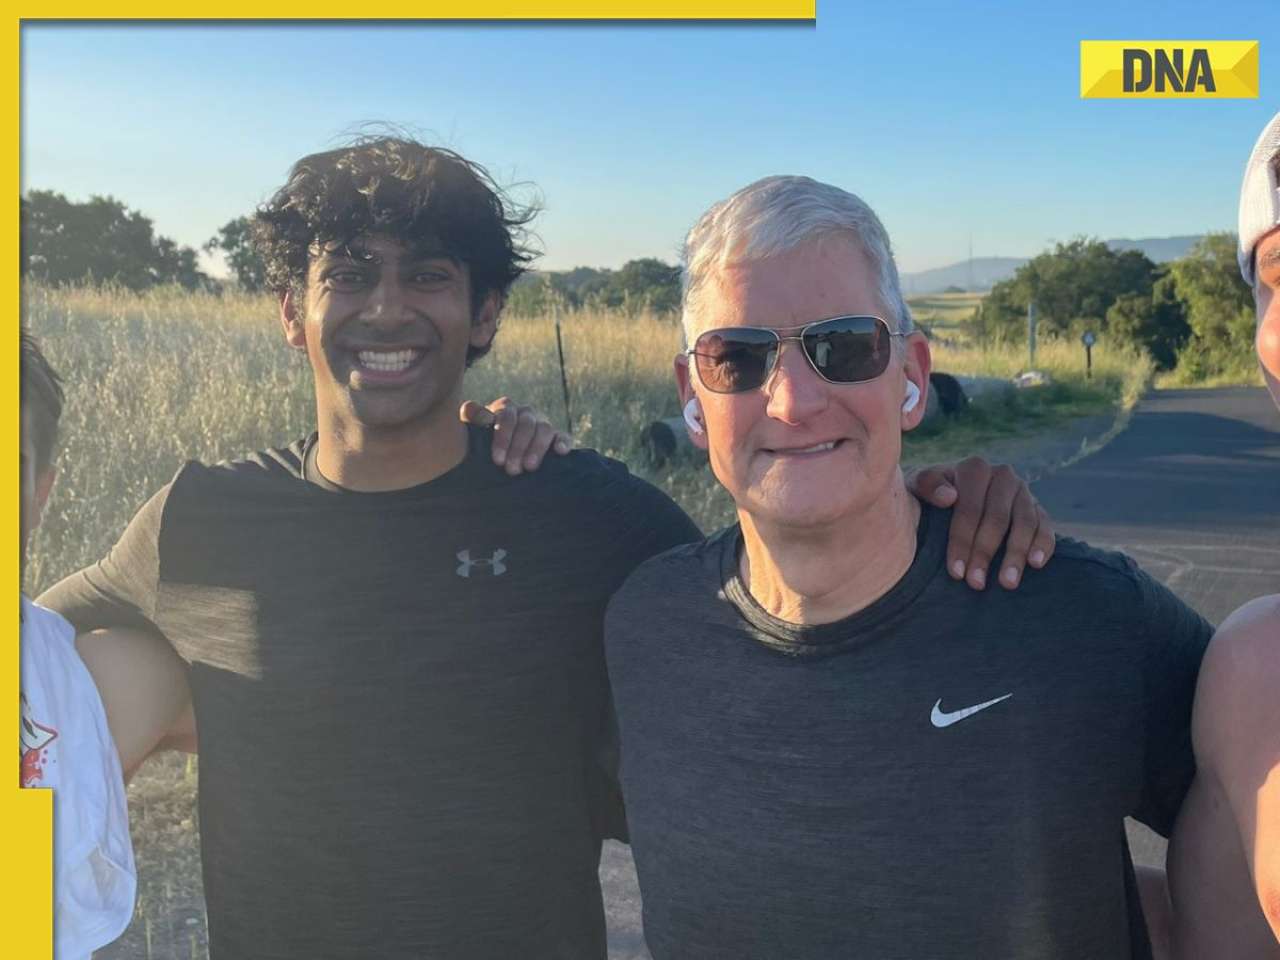 Tim Cook meets Indian student while hiking, confesses about major Apple 'fumble'